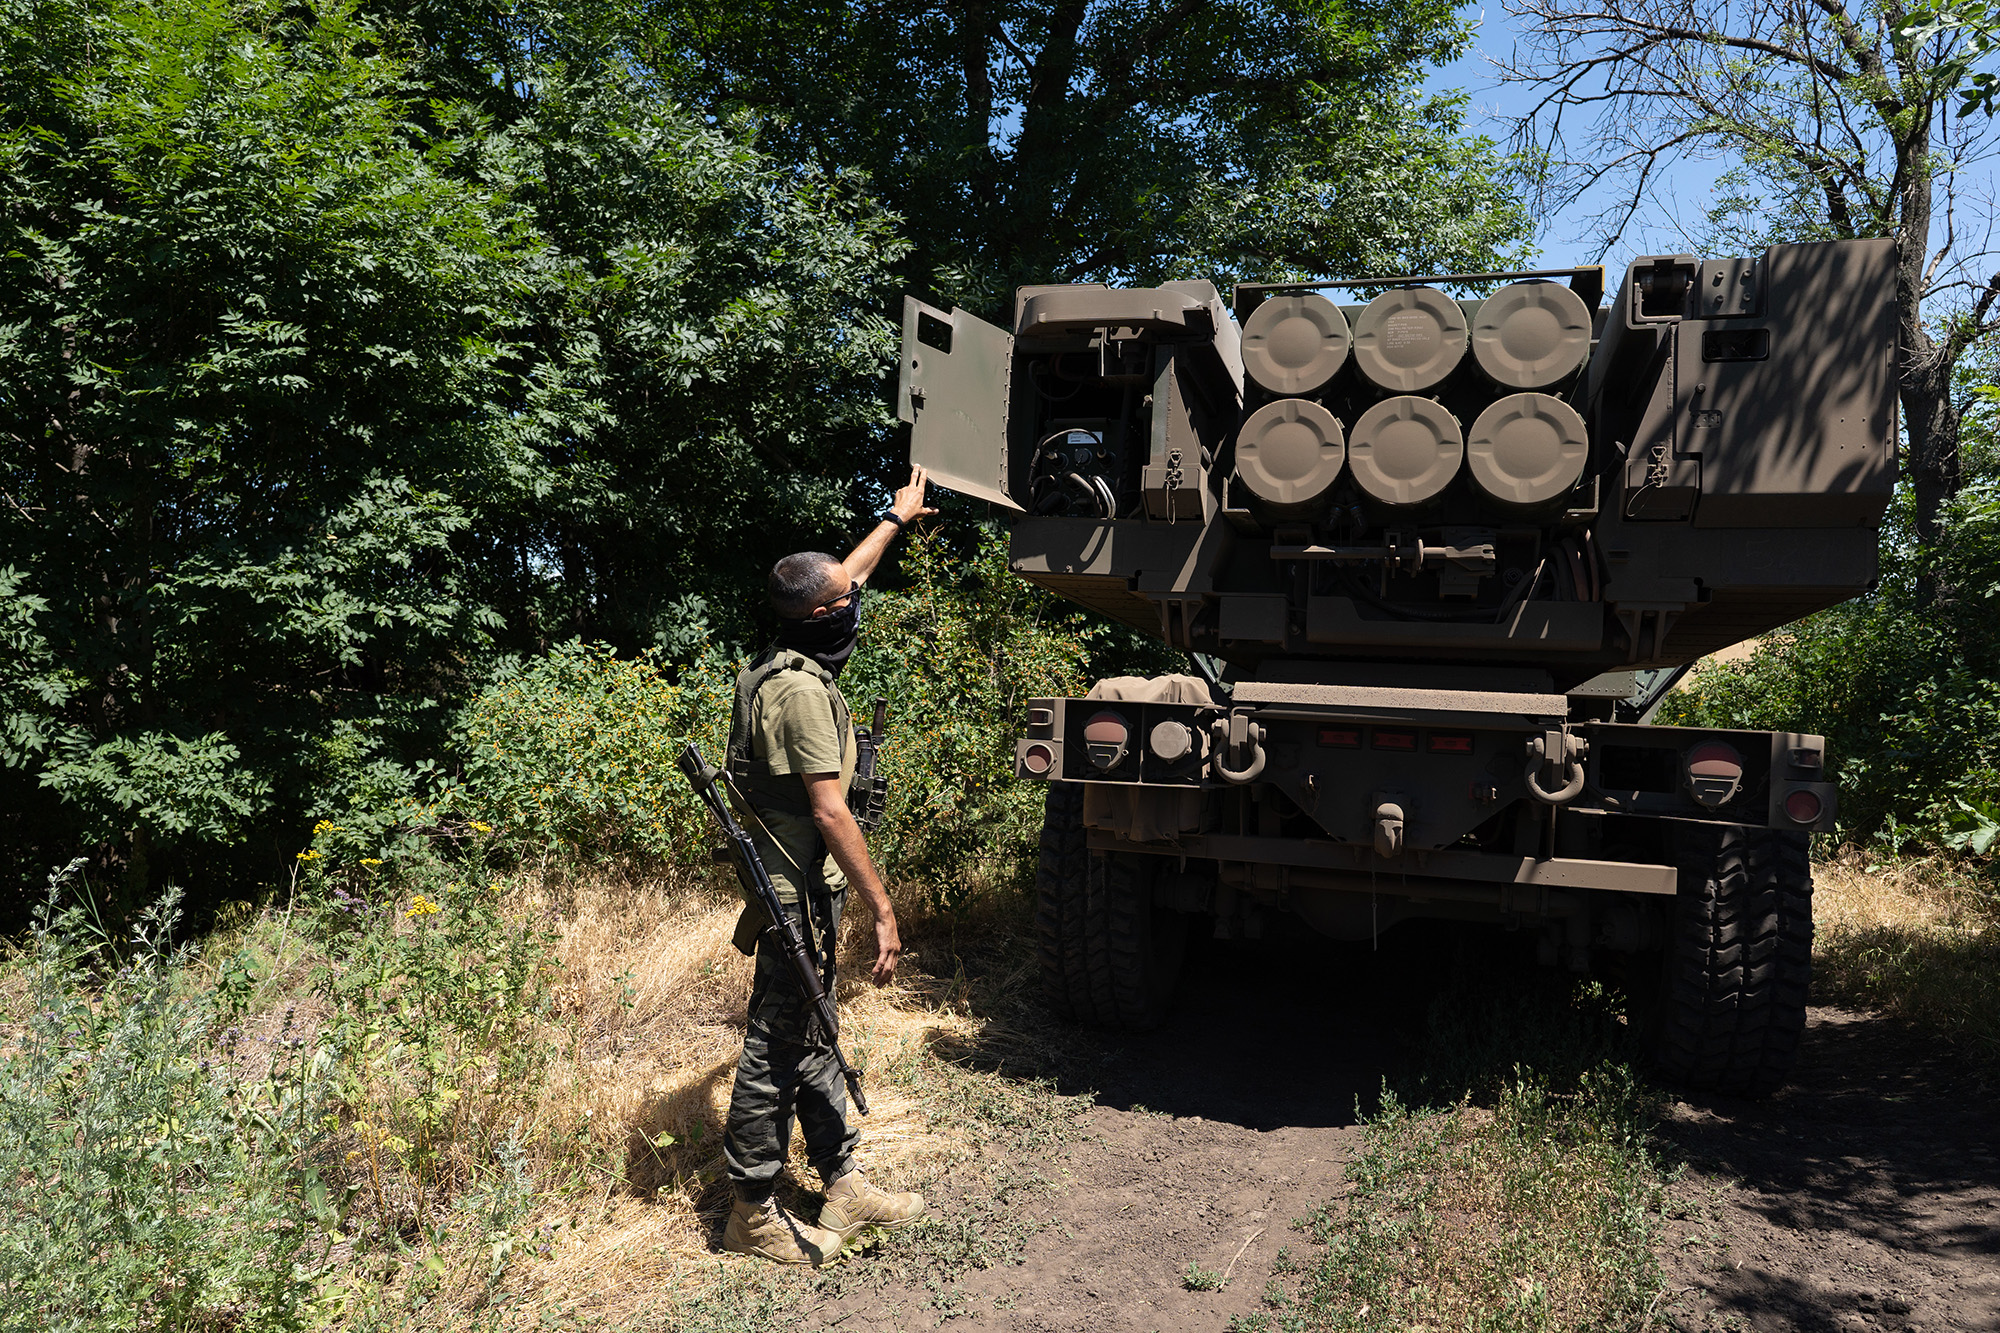 A commander of a unit shows the rockets on a HIMARS vehicle in eastern Ukraine on July 1.